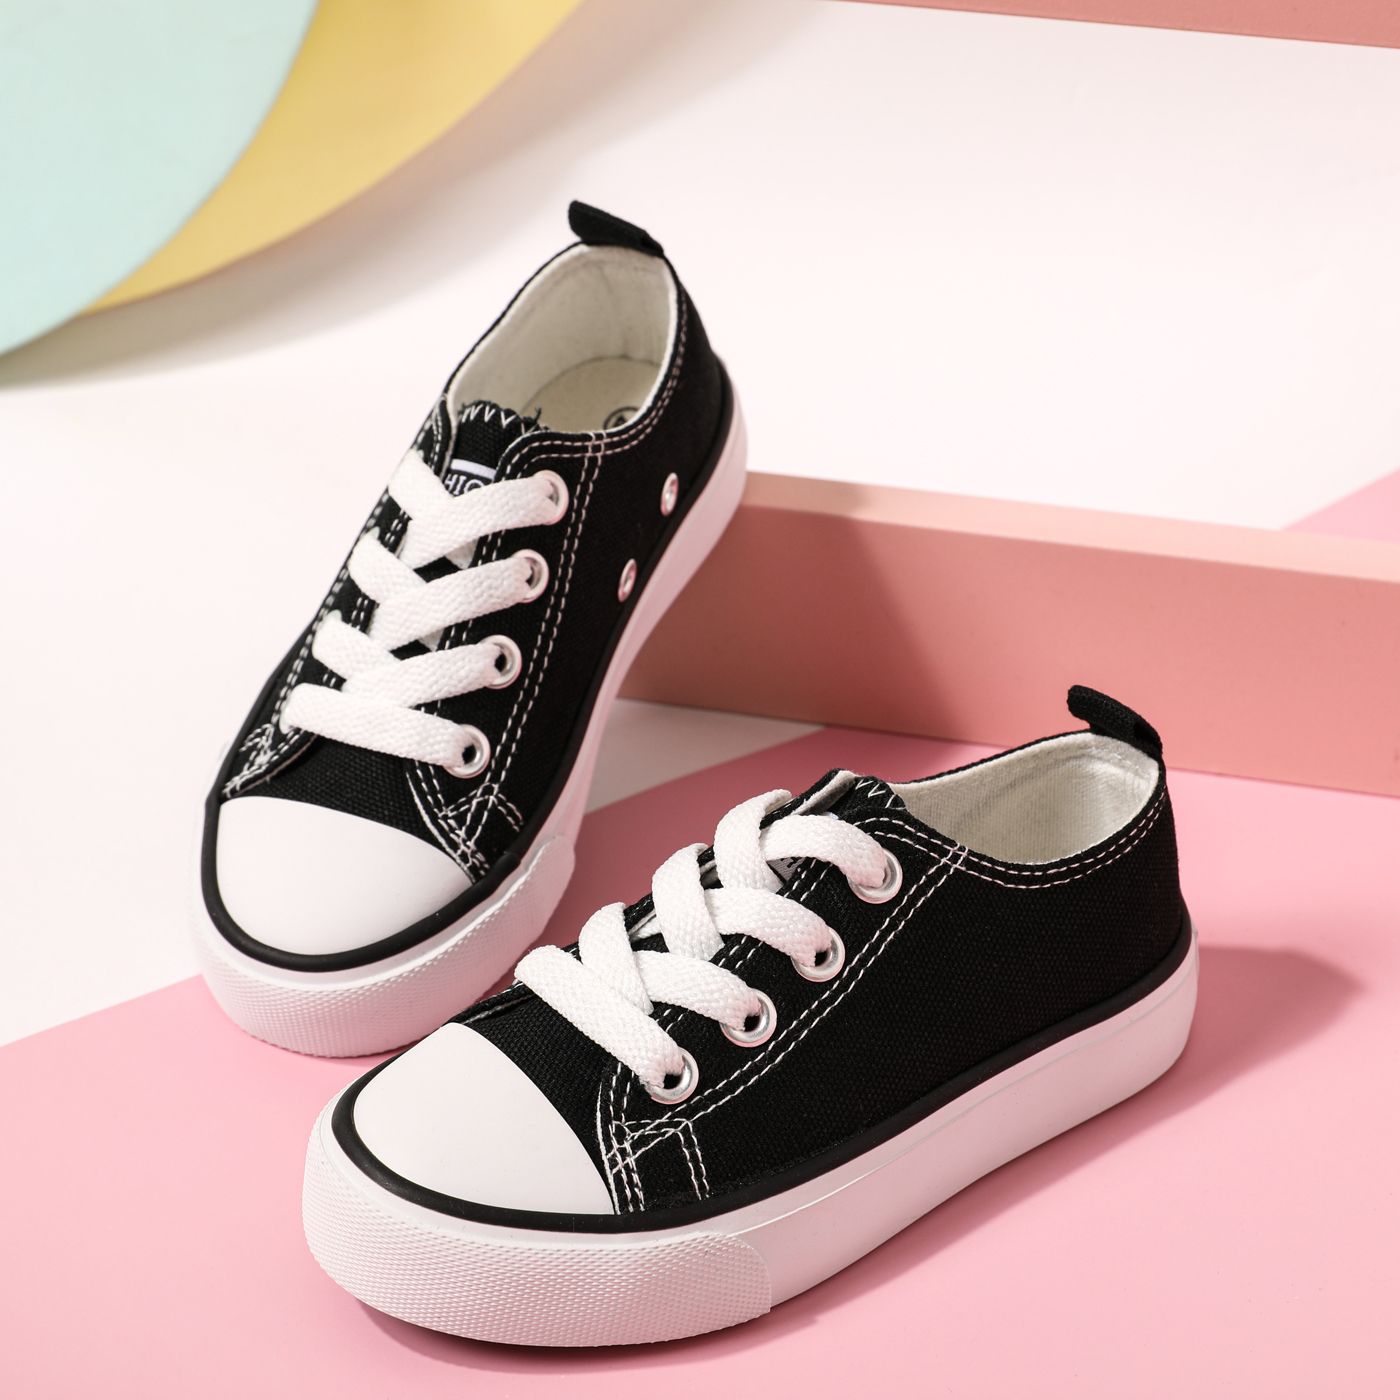 

Toddler / Kid Casual Lace Up Canvas Shoes (Toddler US 6-7.5 and Toddler US 8-Little Kid US 11.5 outsole are different)